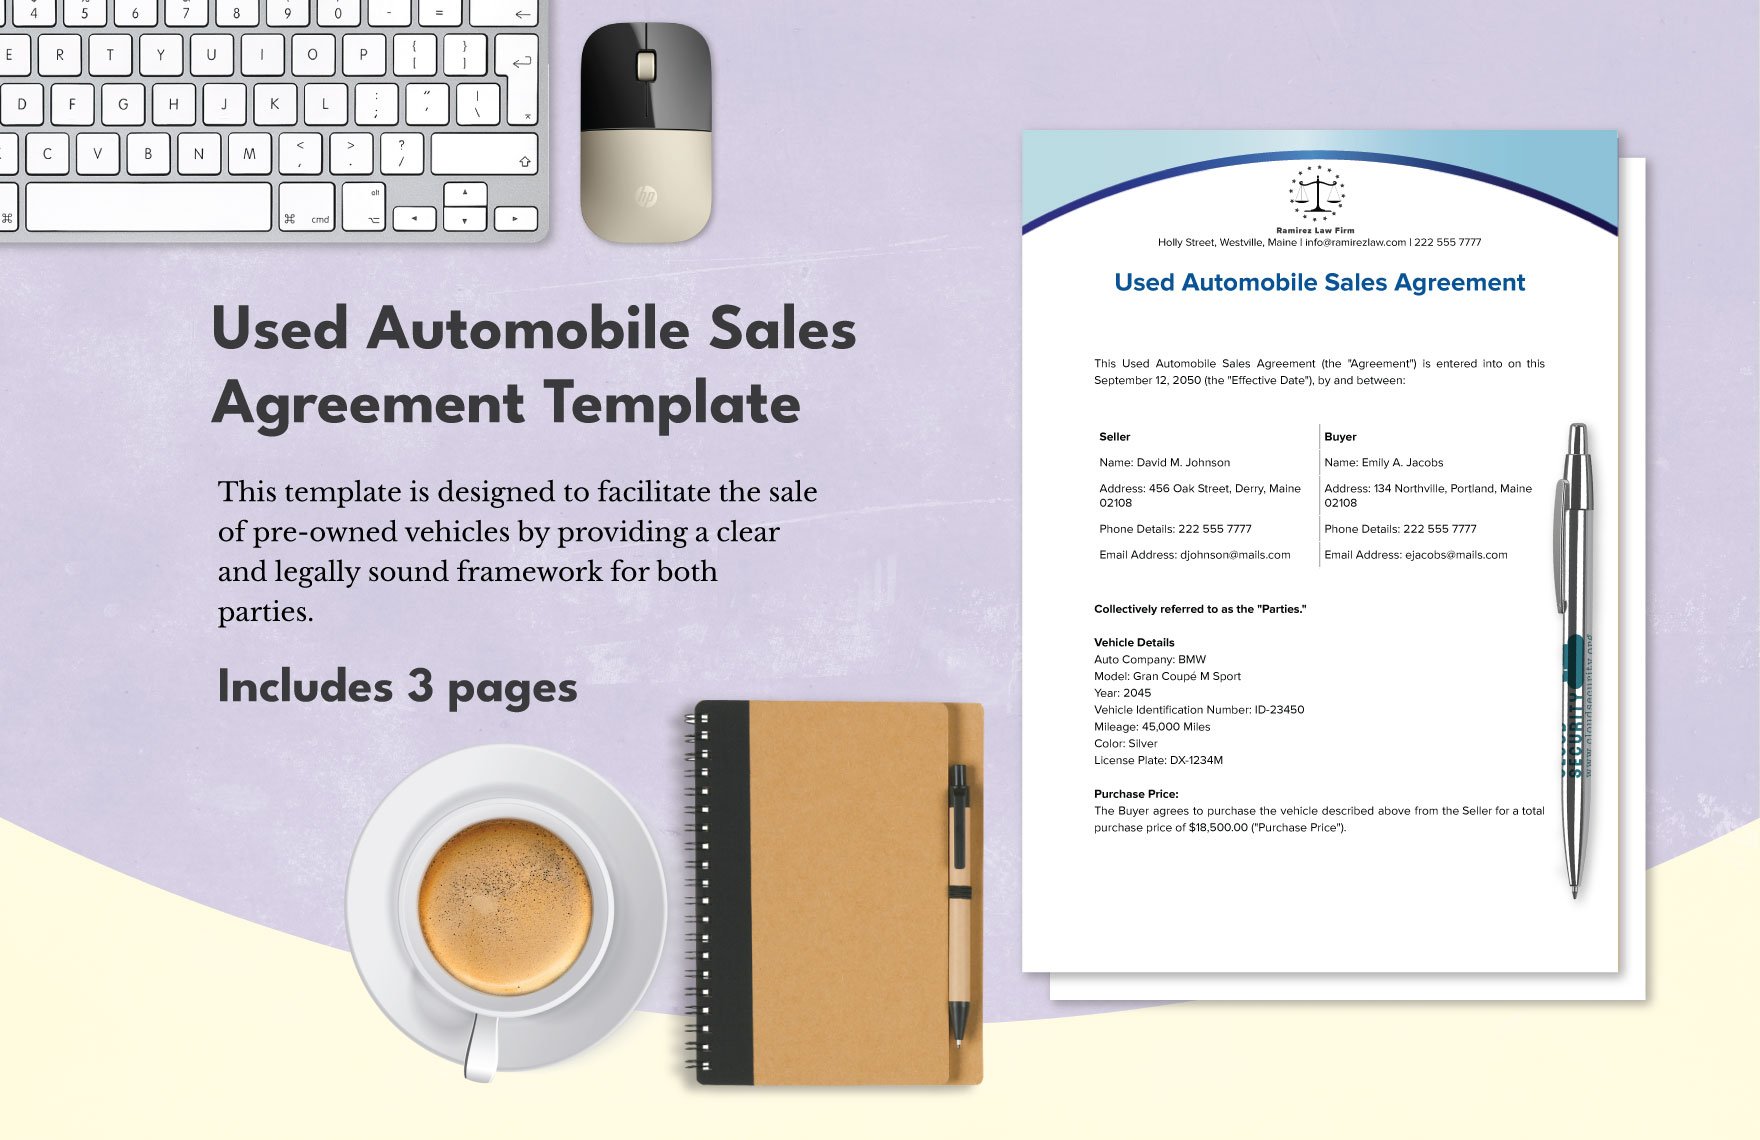 Used Automobile Sales Agreement Template in Word, Google Docs, PDF